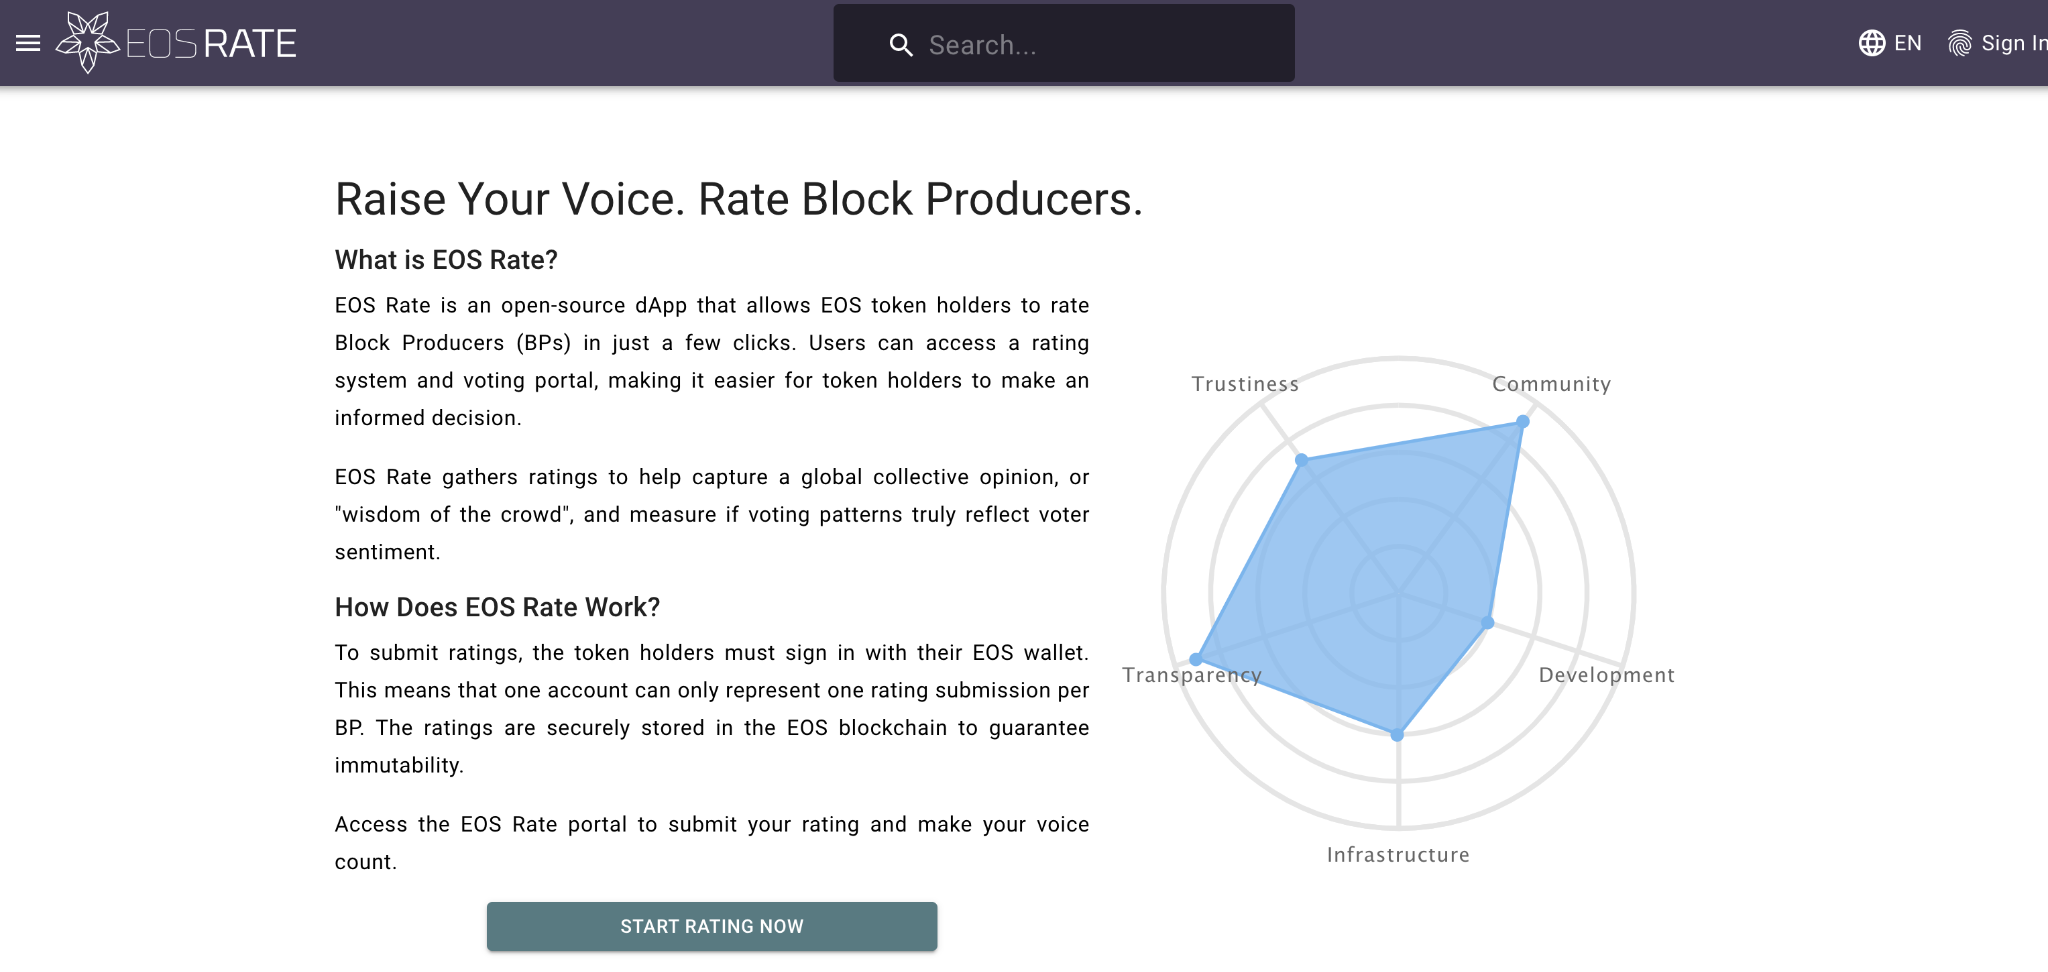 Rate Block Producers